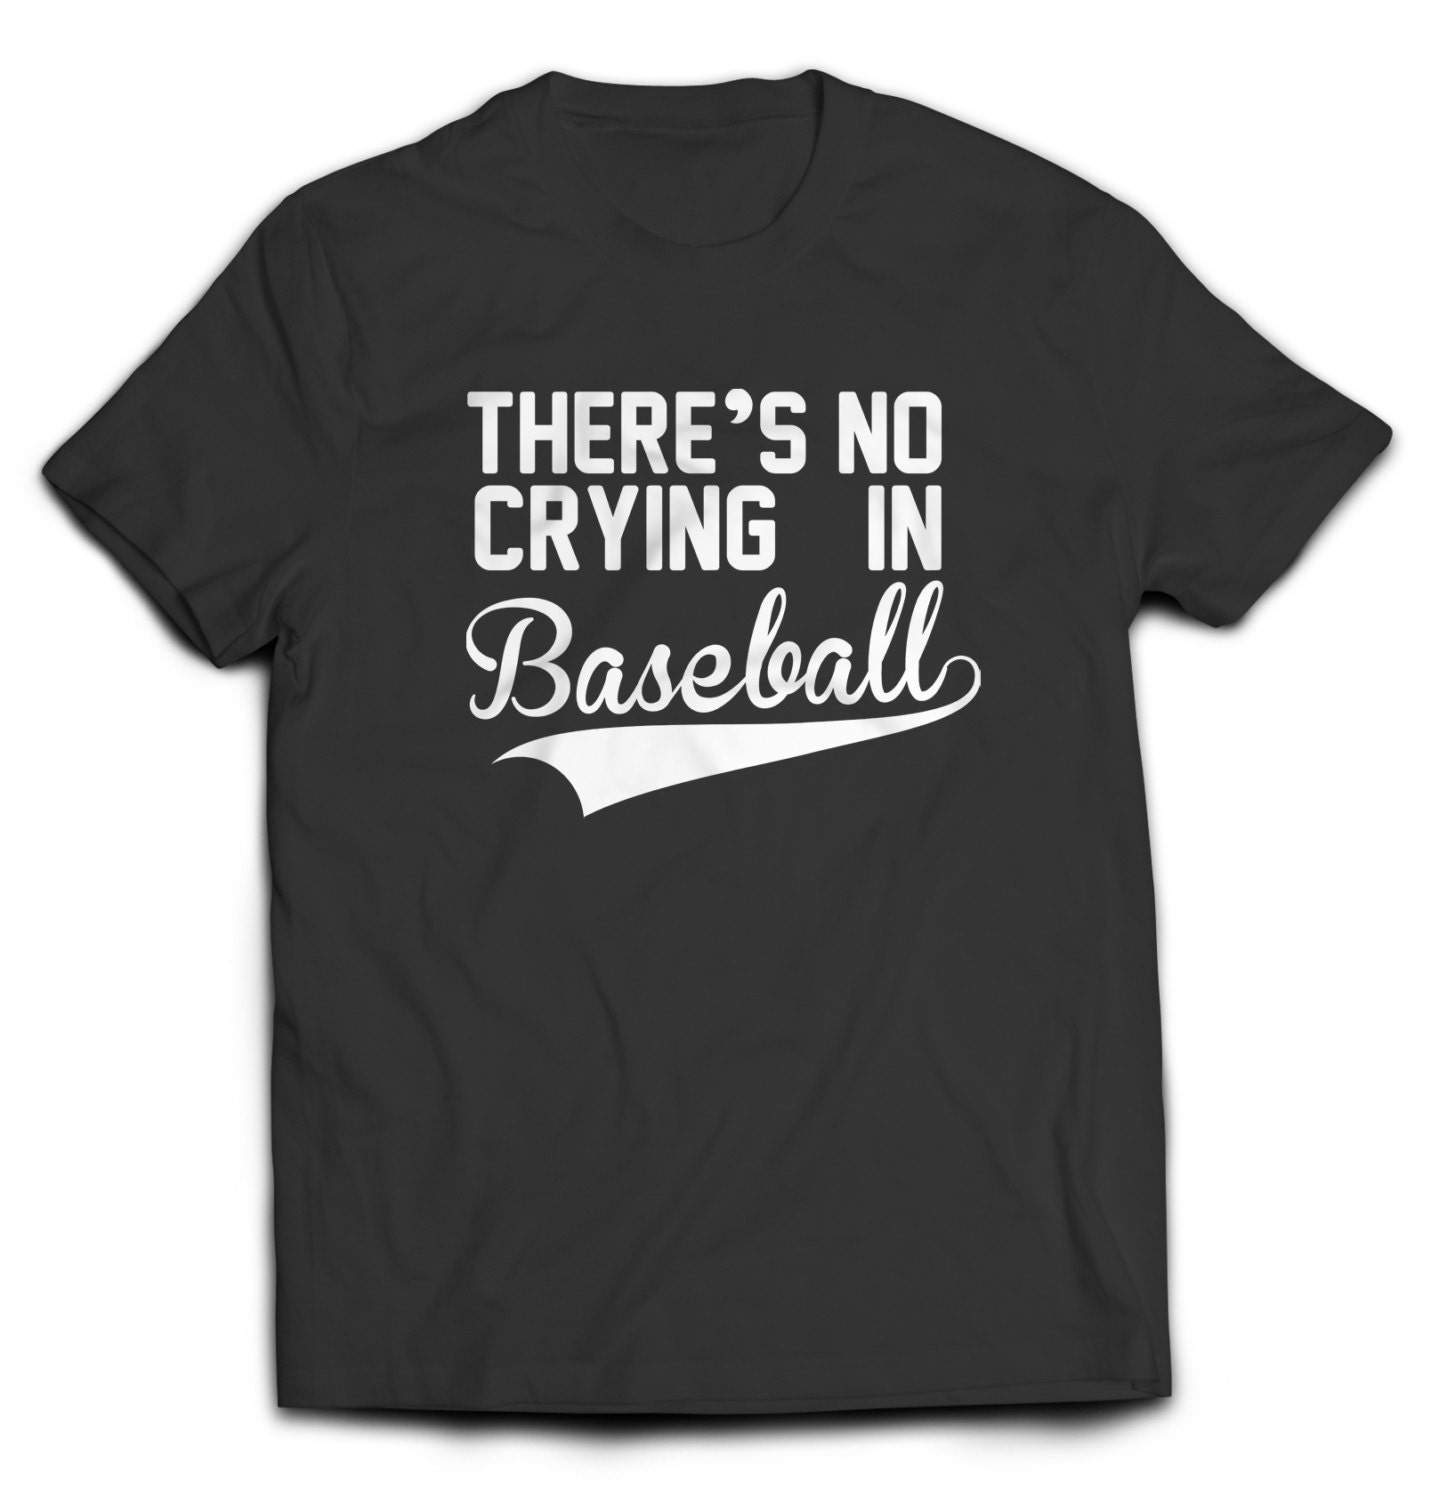 There's No Crying in Baseball T-shirt by DKtshirts on Etsy